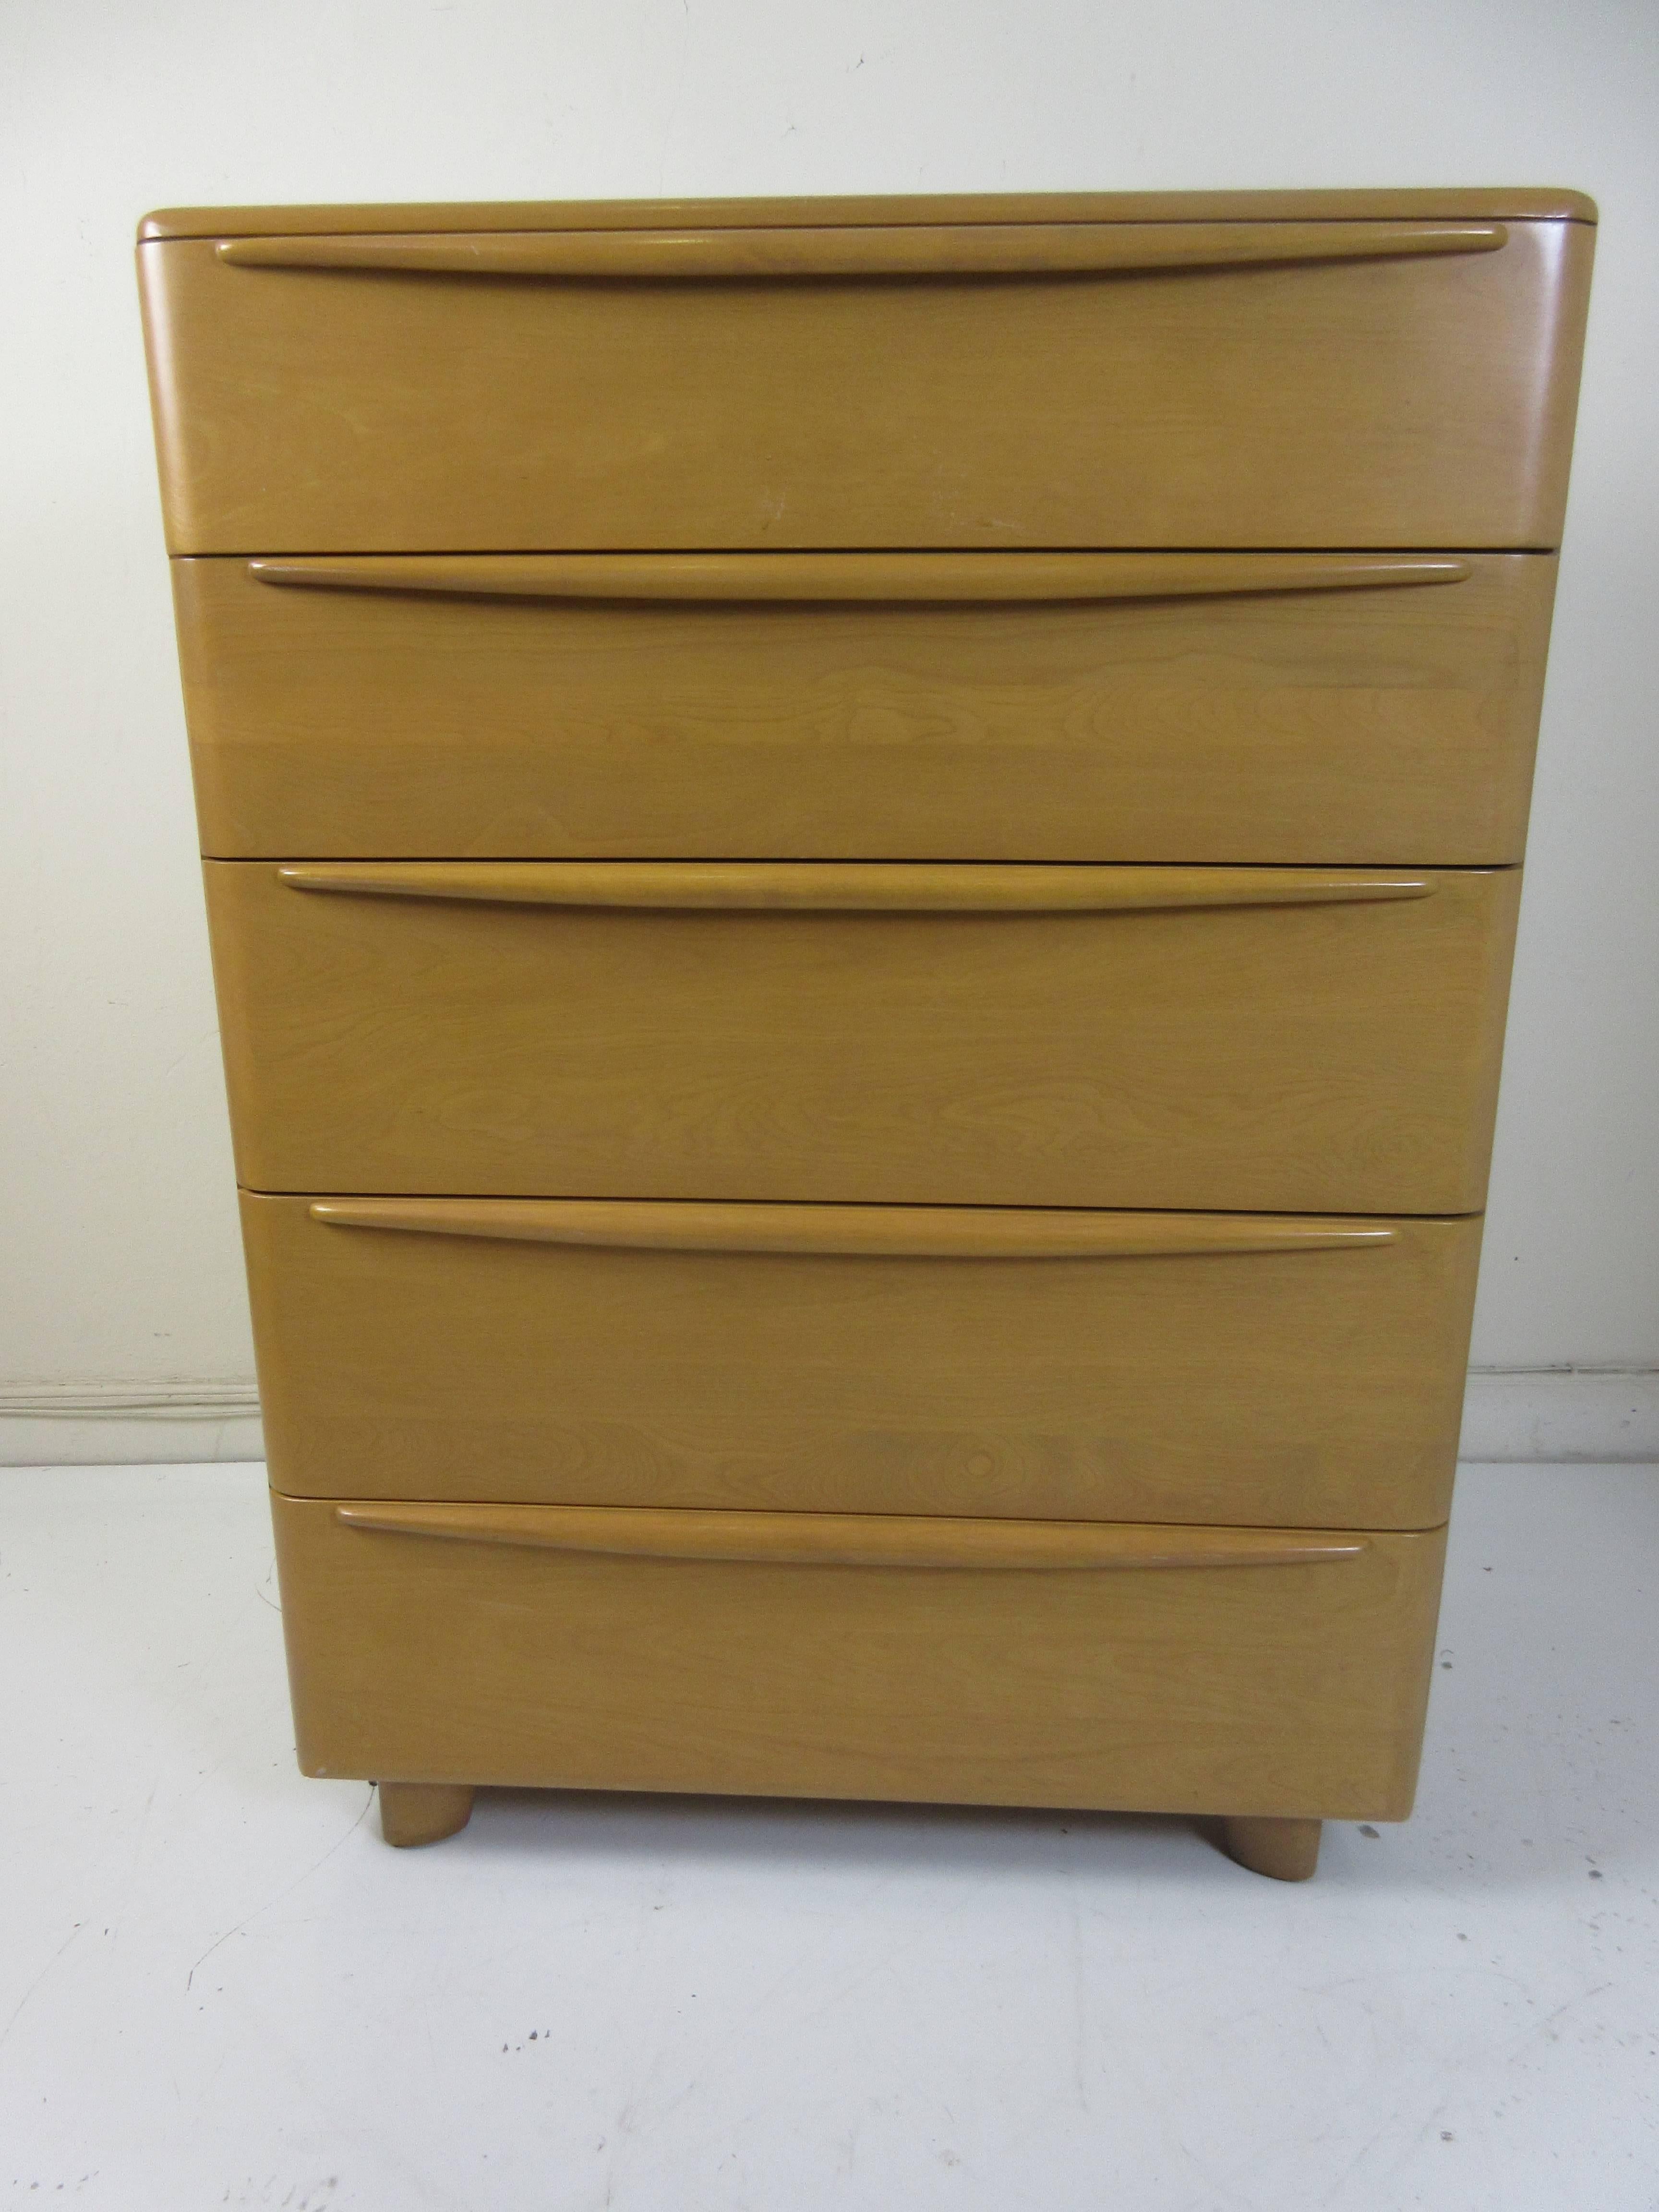 Heywood Wakefield encore tall chest of drawers in solid maple from 1952 and bought from the original family. Complete set available with storage headboard, low dresser with mirror, and nightstand (pictured) second nightstand in slightly different